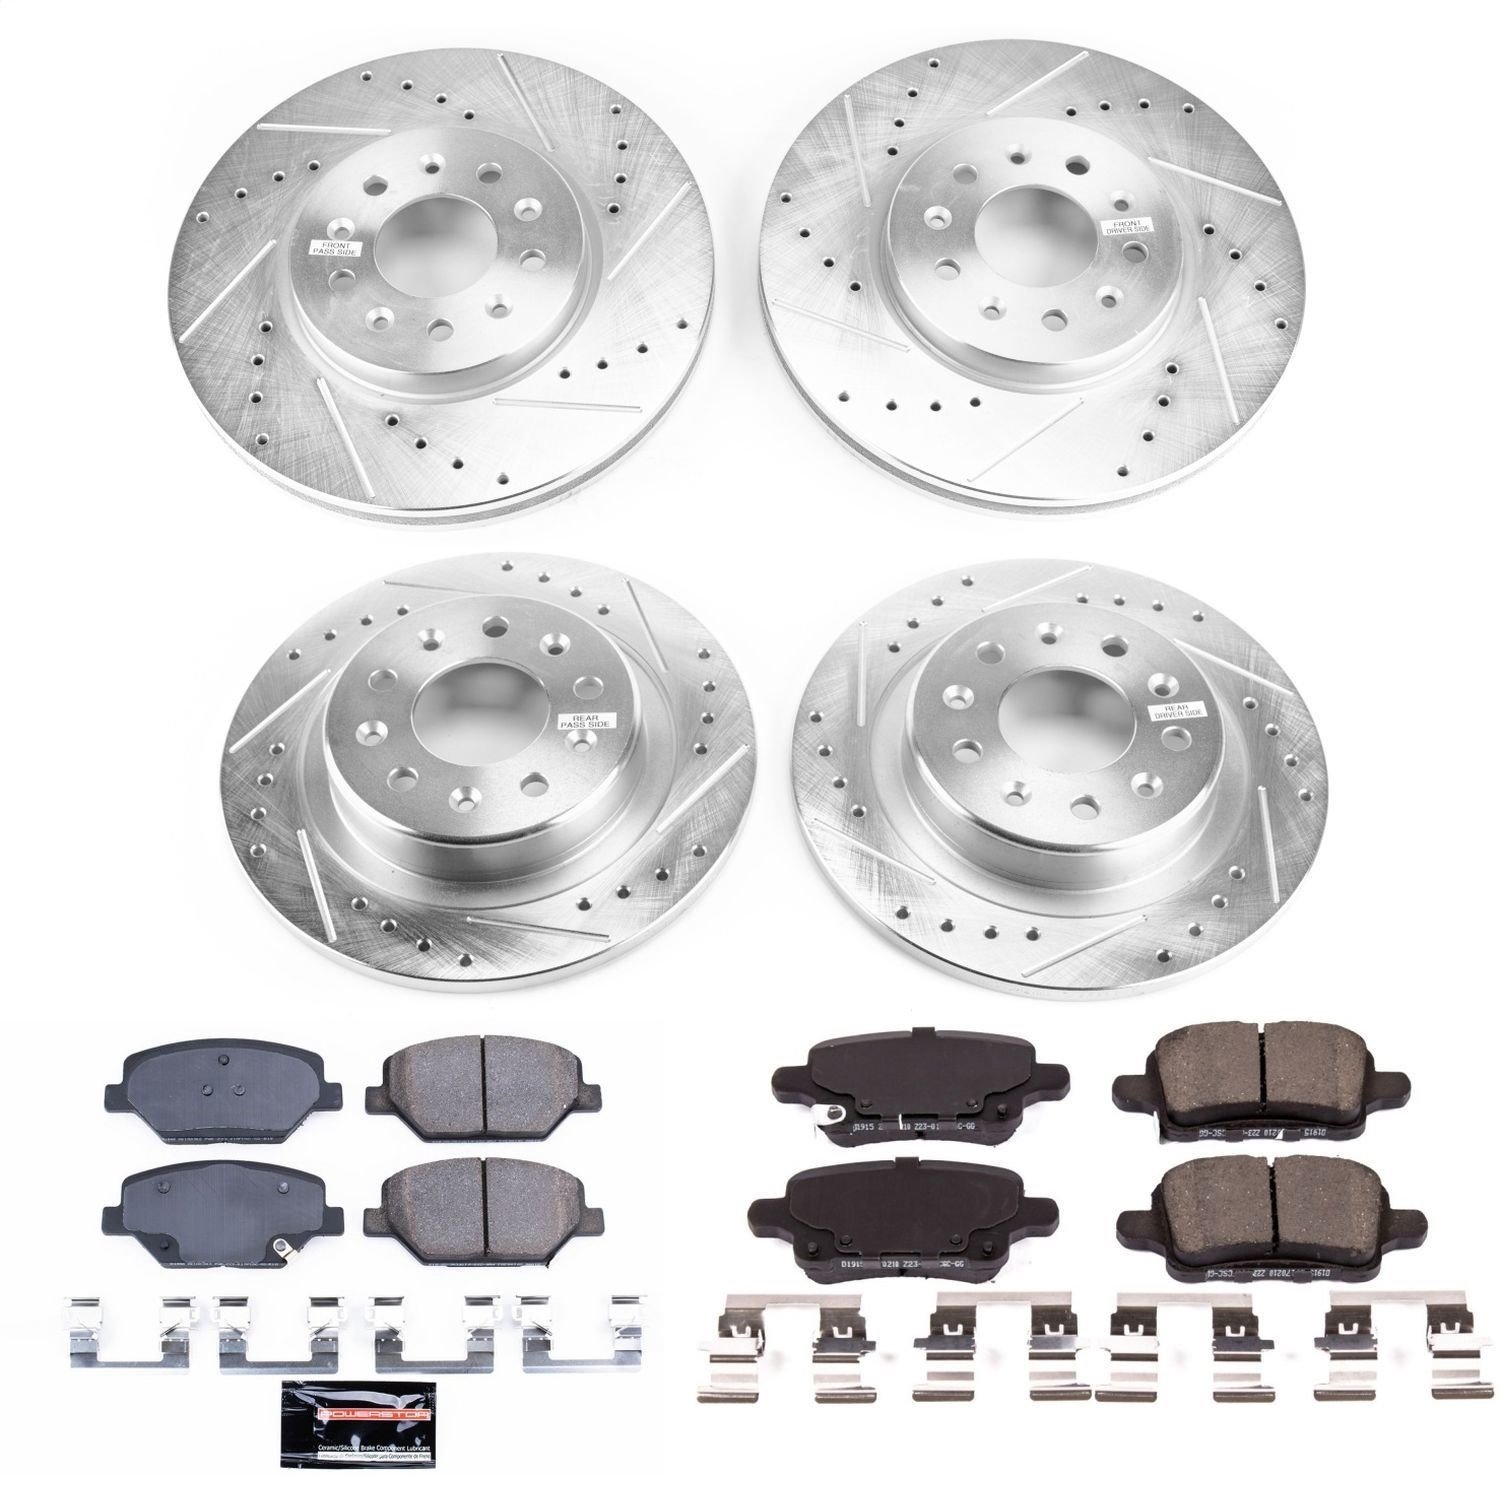 Evolution Sport Z23 Front and Rear Brake Pad and Rotor Kit Fits Select Chevrolet, GMC Models